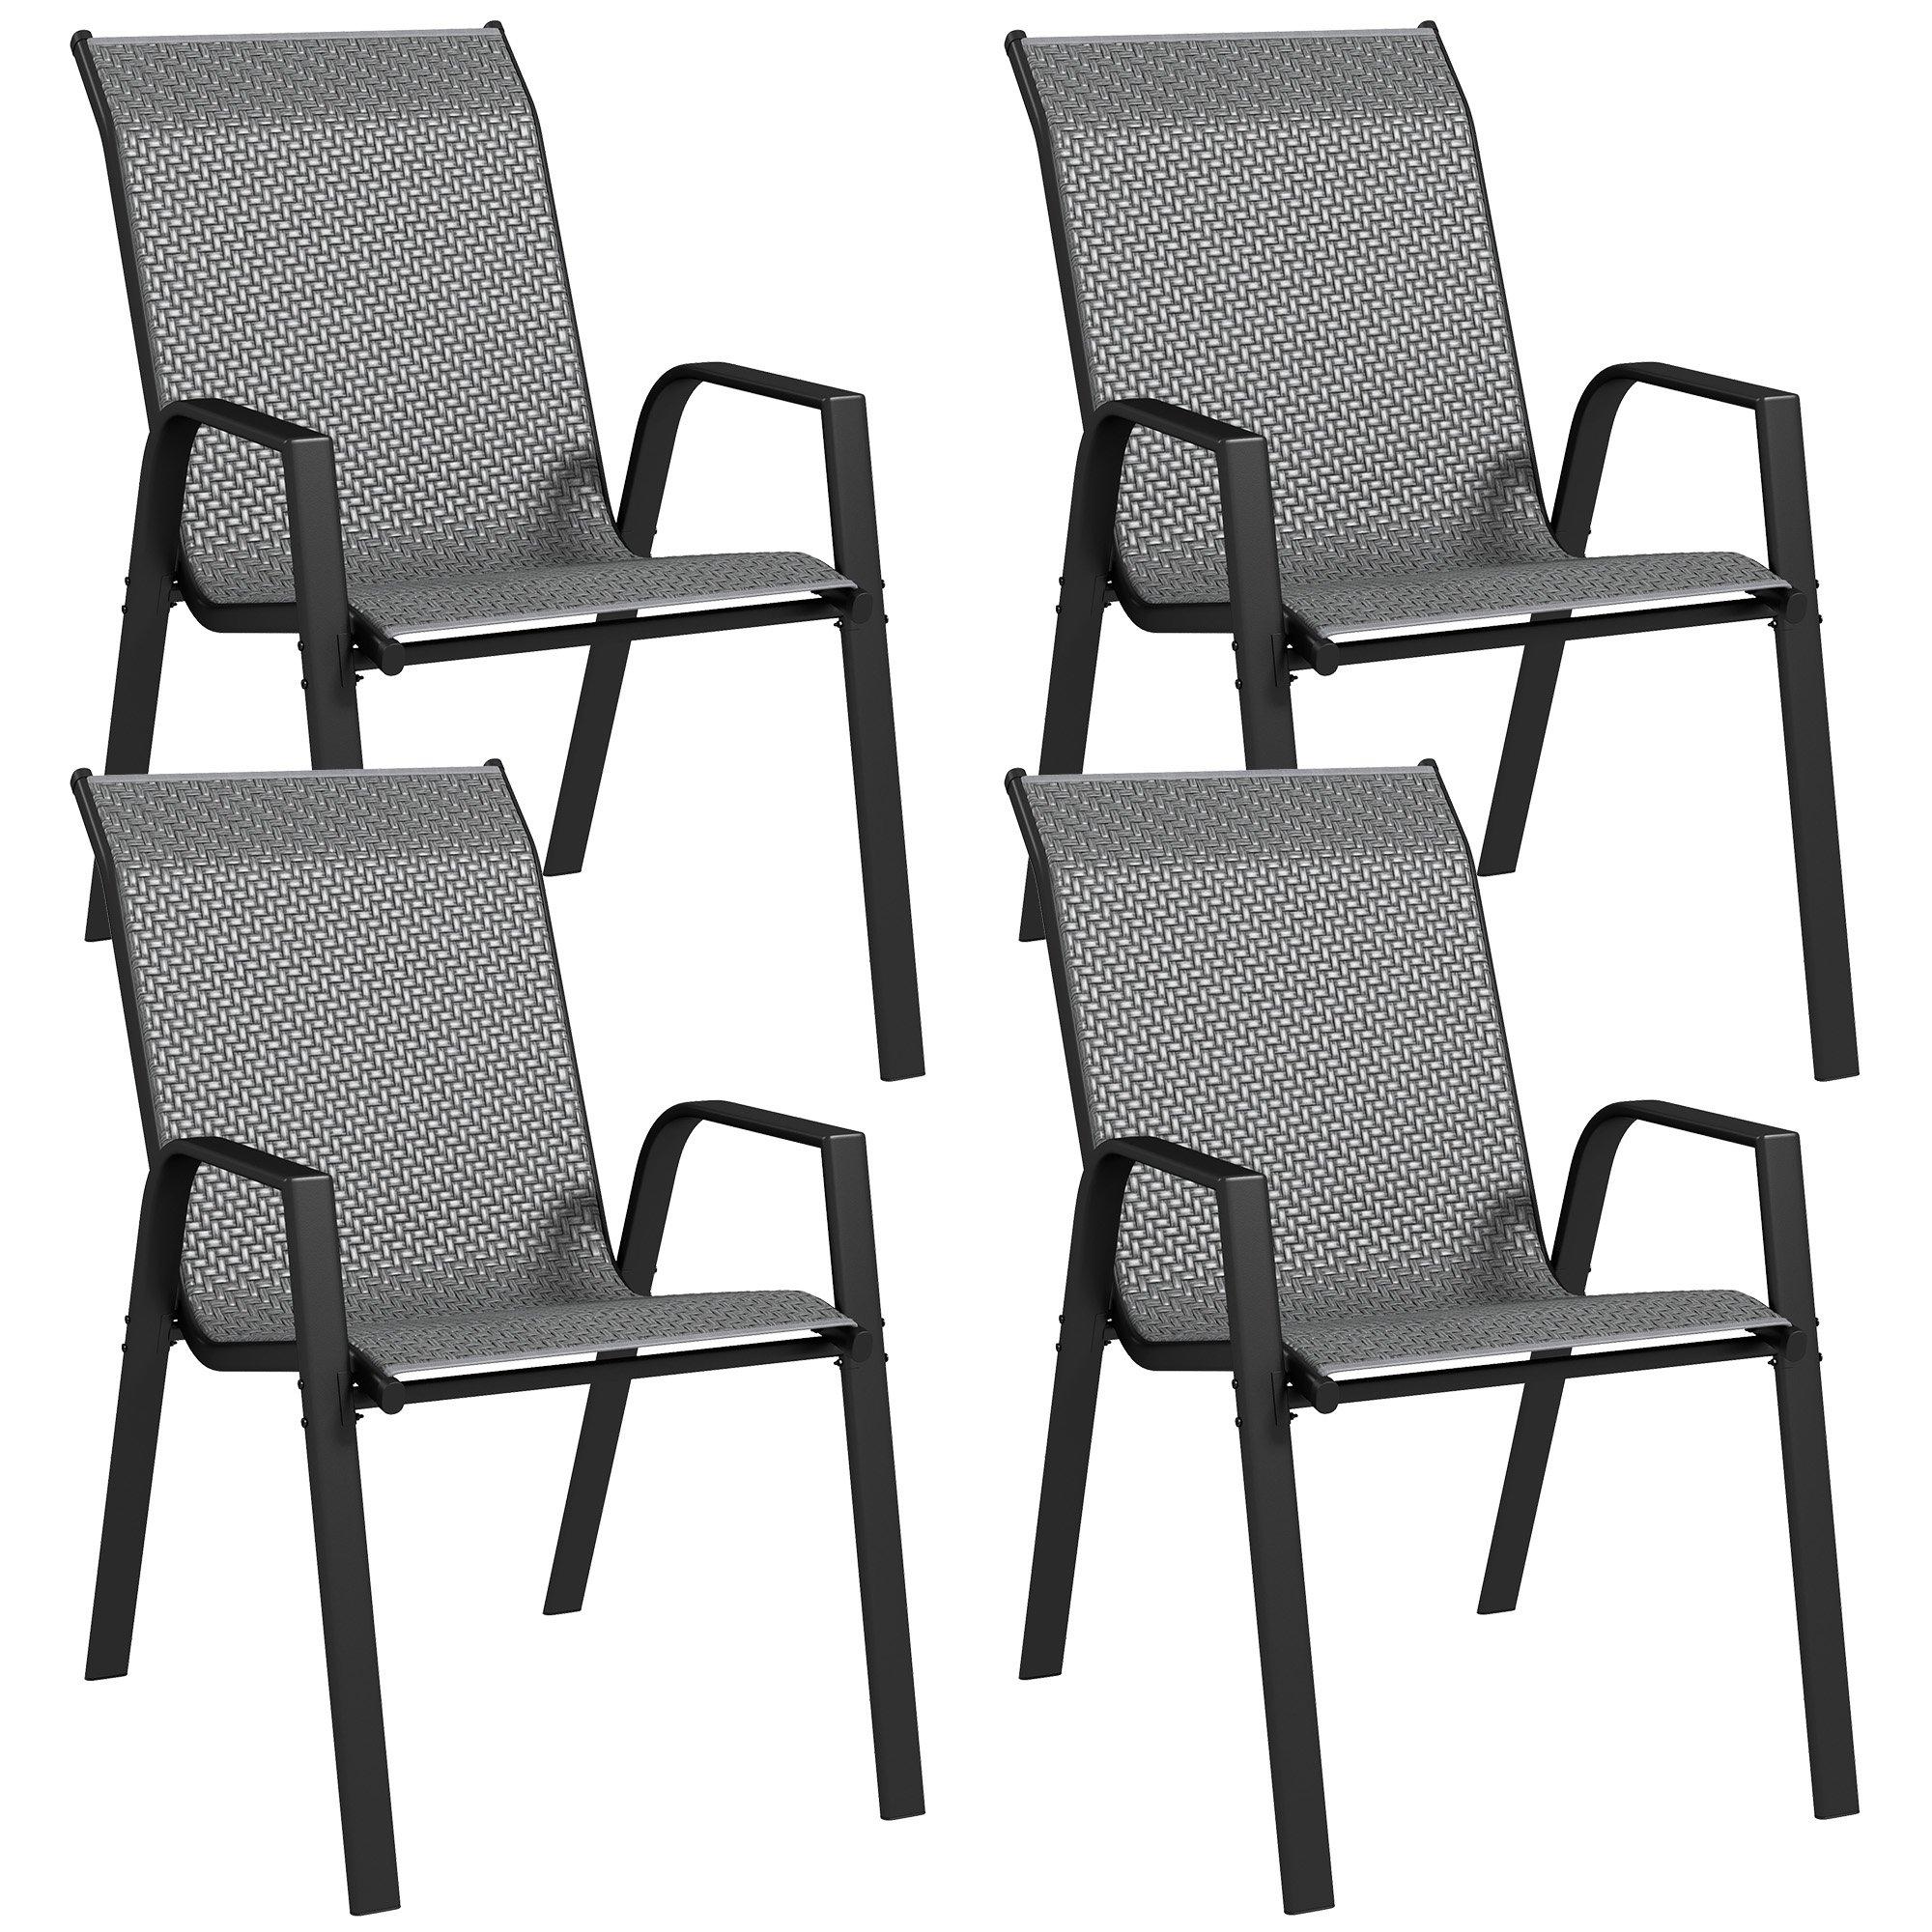 Wicker Dining Chairs Set of 4, Stackable Outdoor Chairs